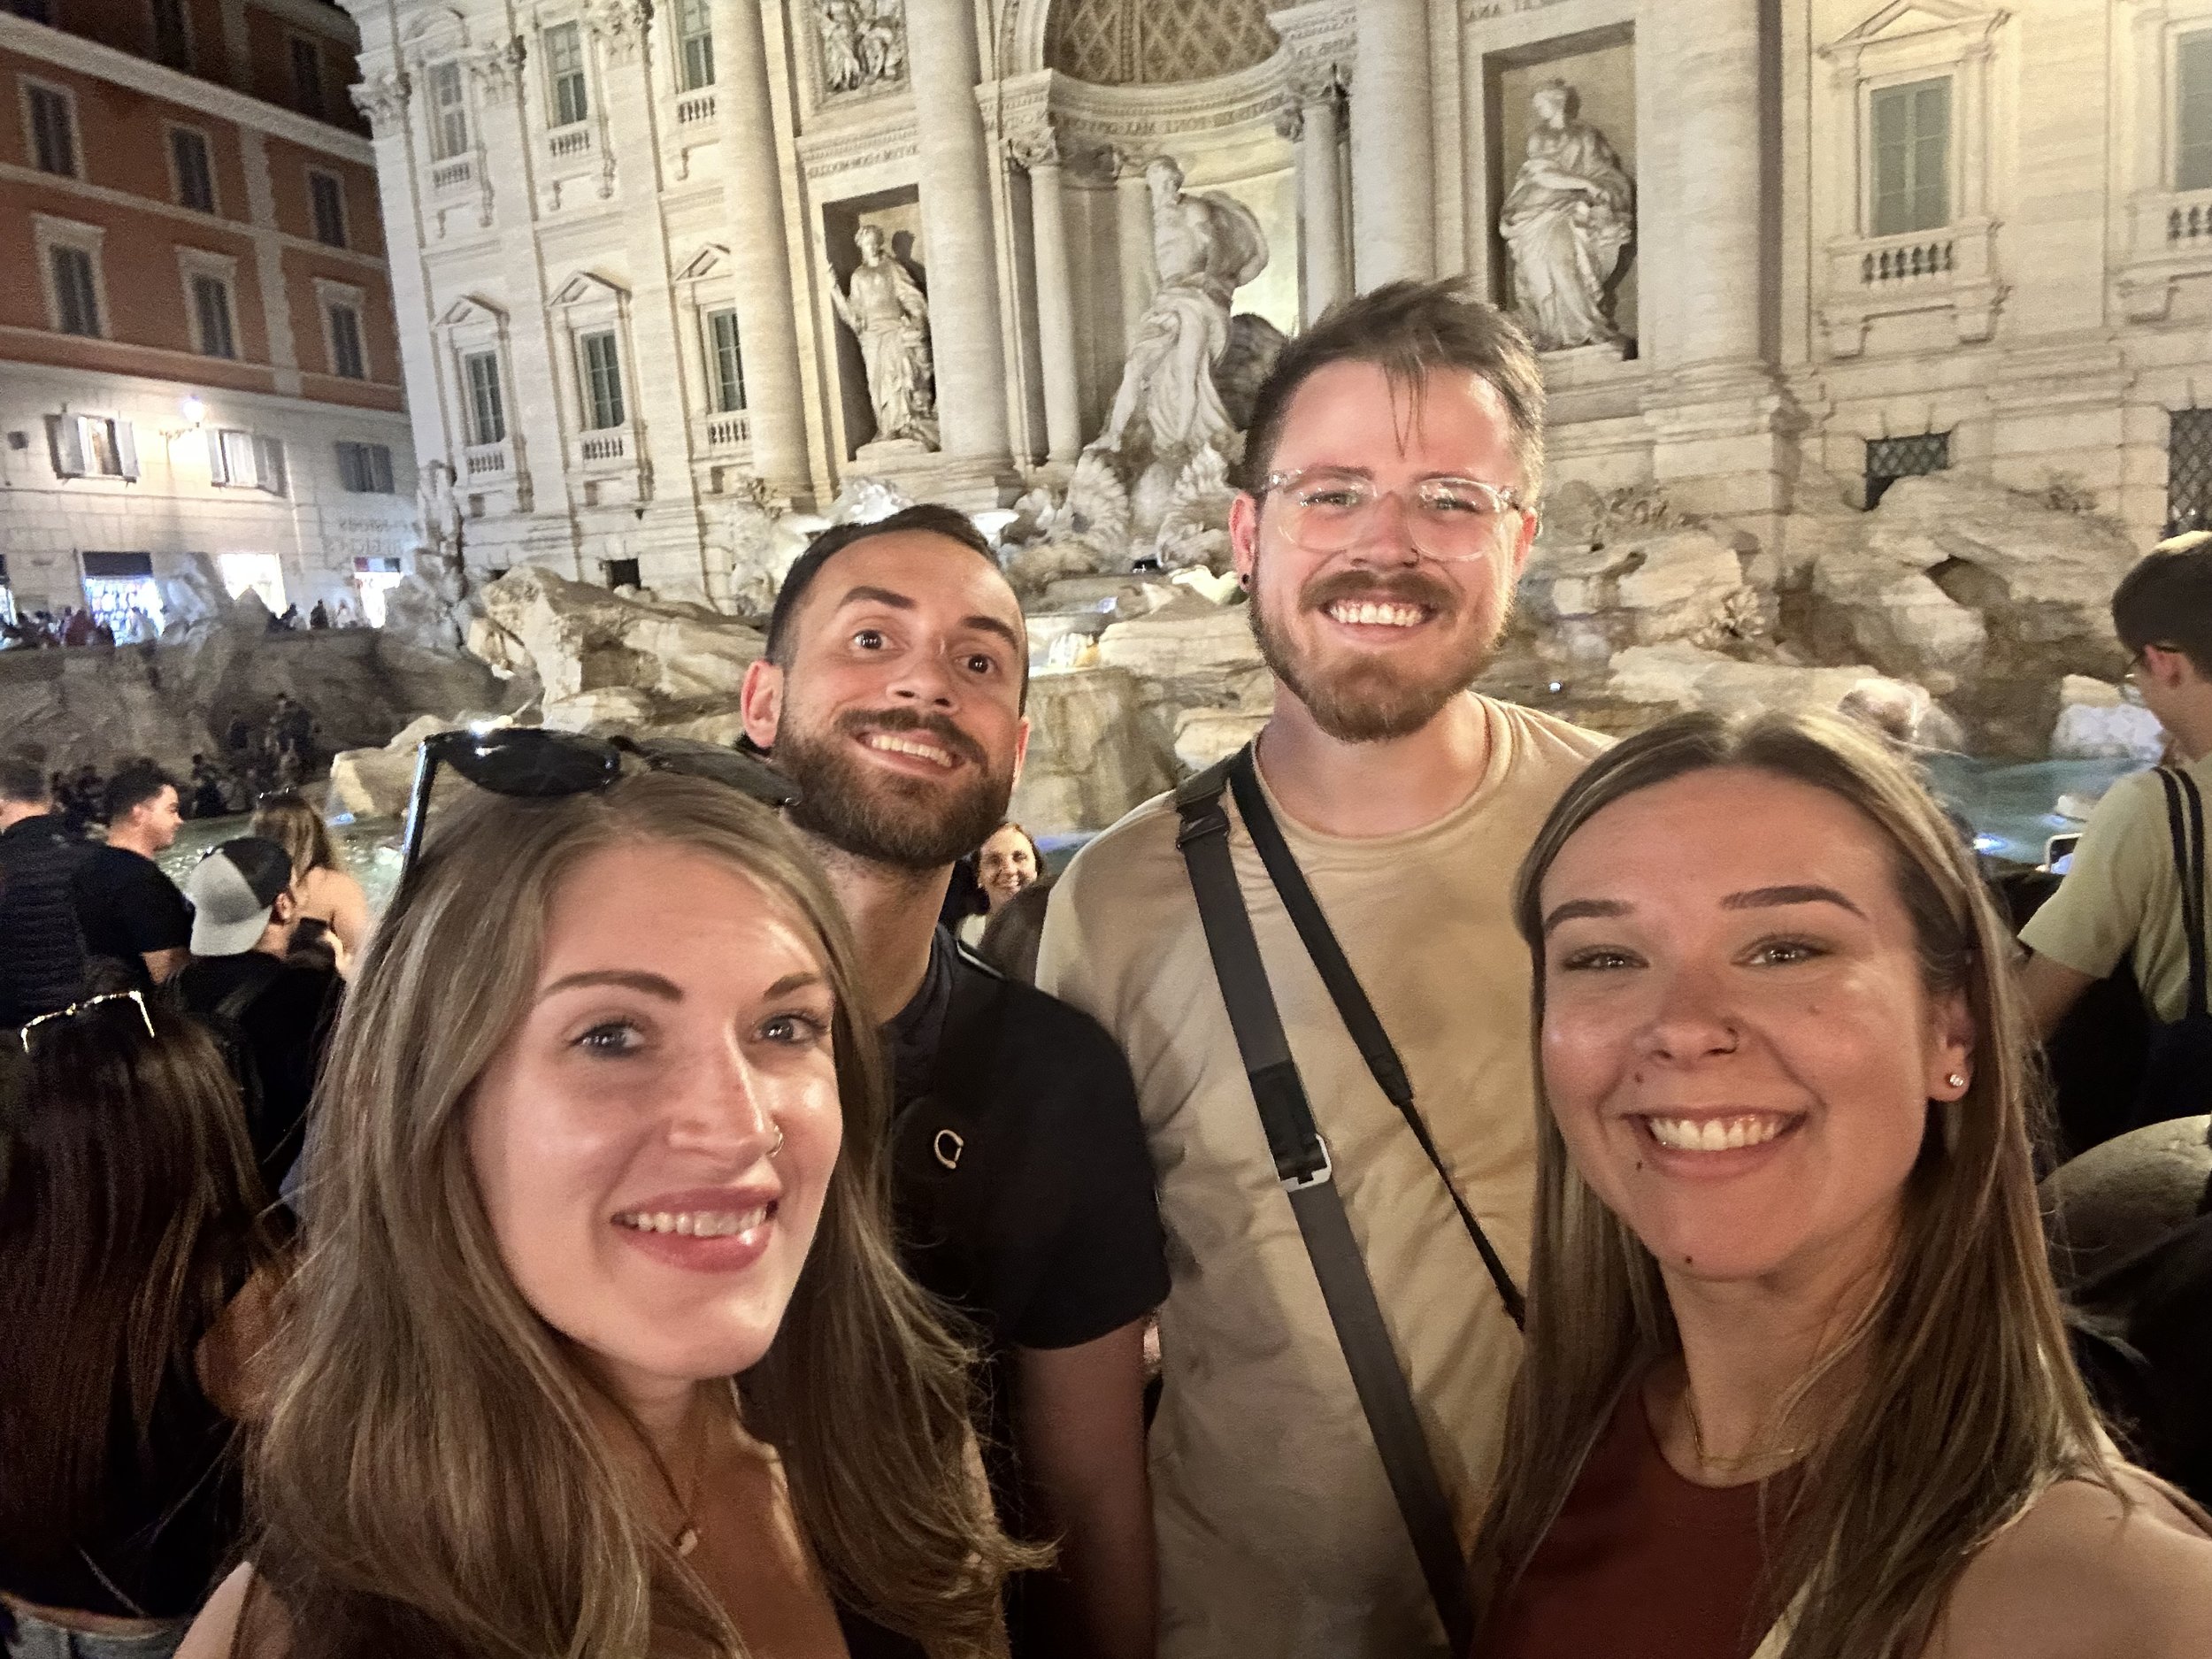 Roman Holiday: Connor and Friends' Delightful Moment at the Trevi Fountain